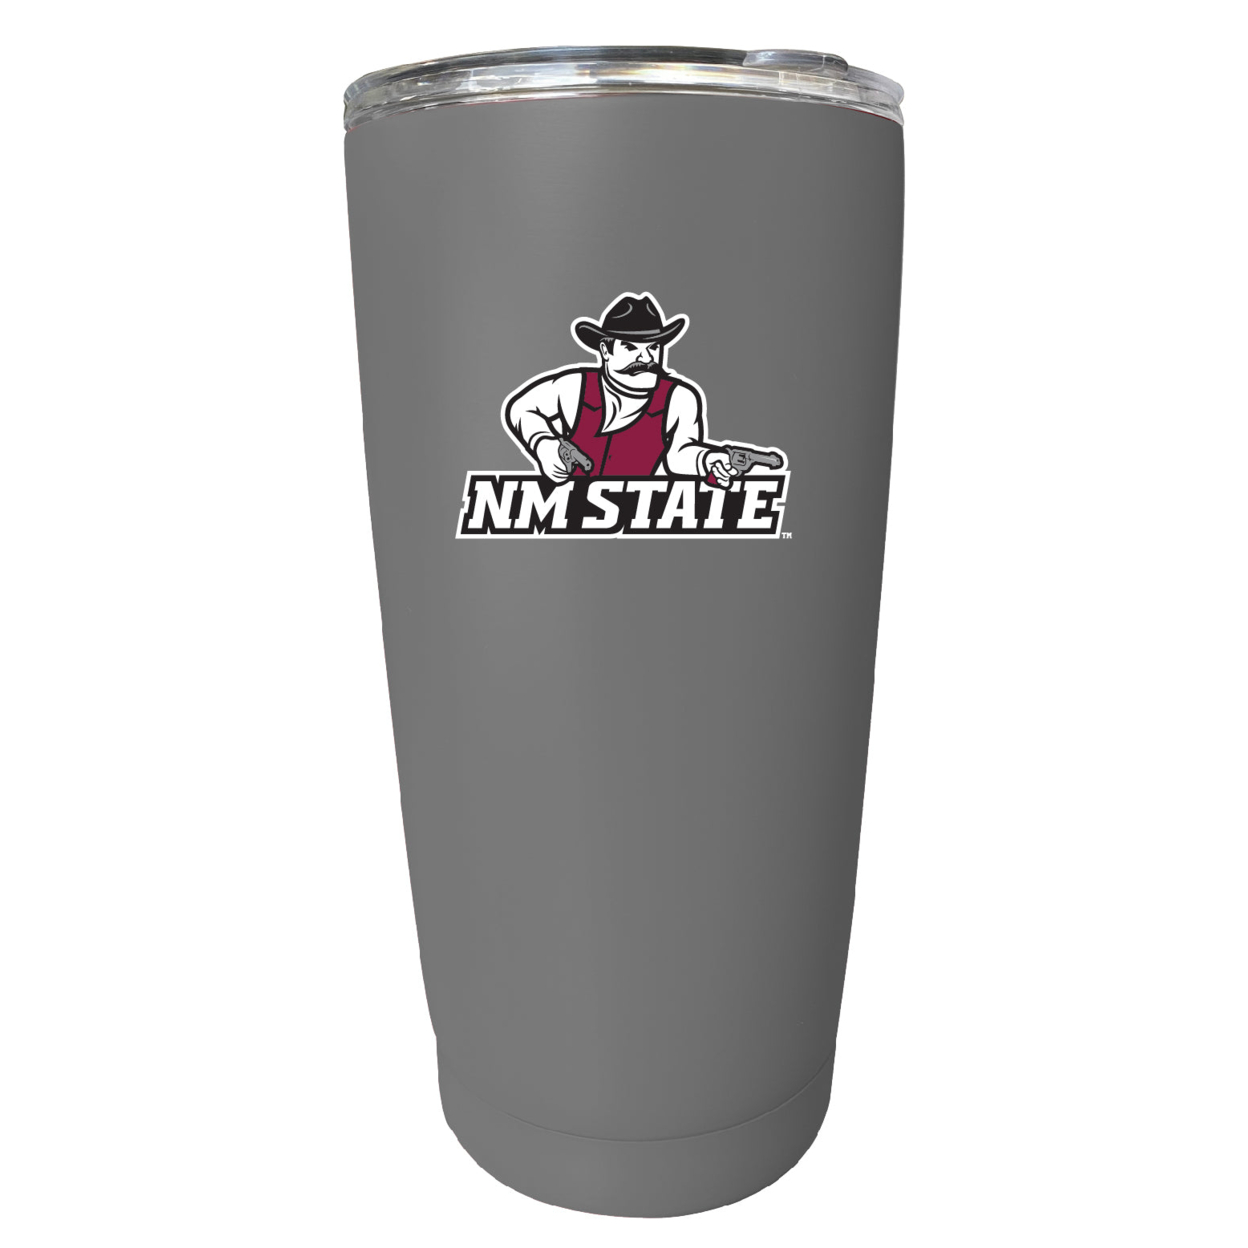 New Mexico State University Aggies 16 Oz Stainless Steel Insulated Tumbler - Gray